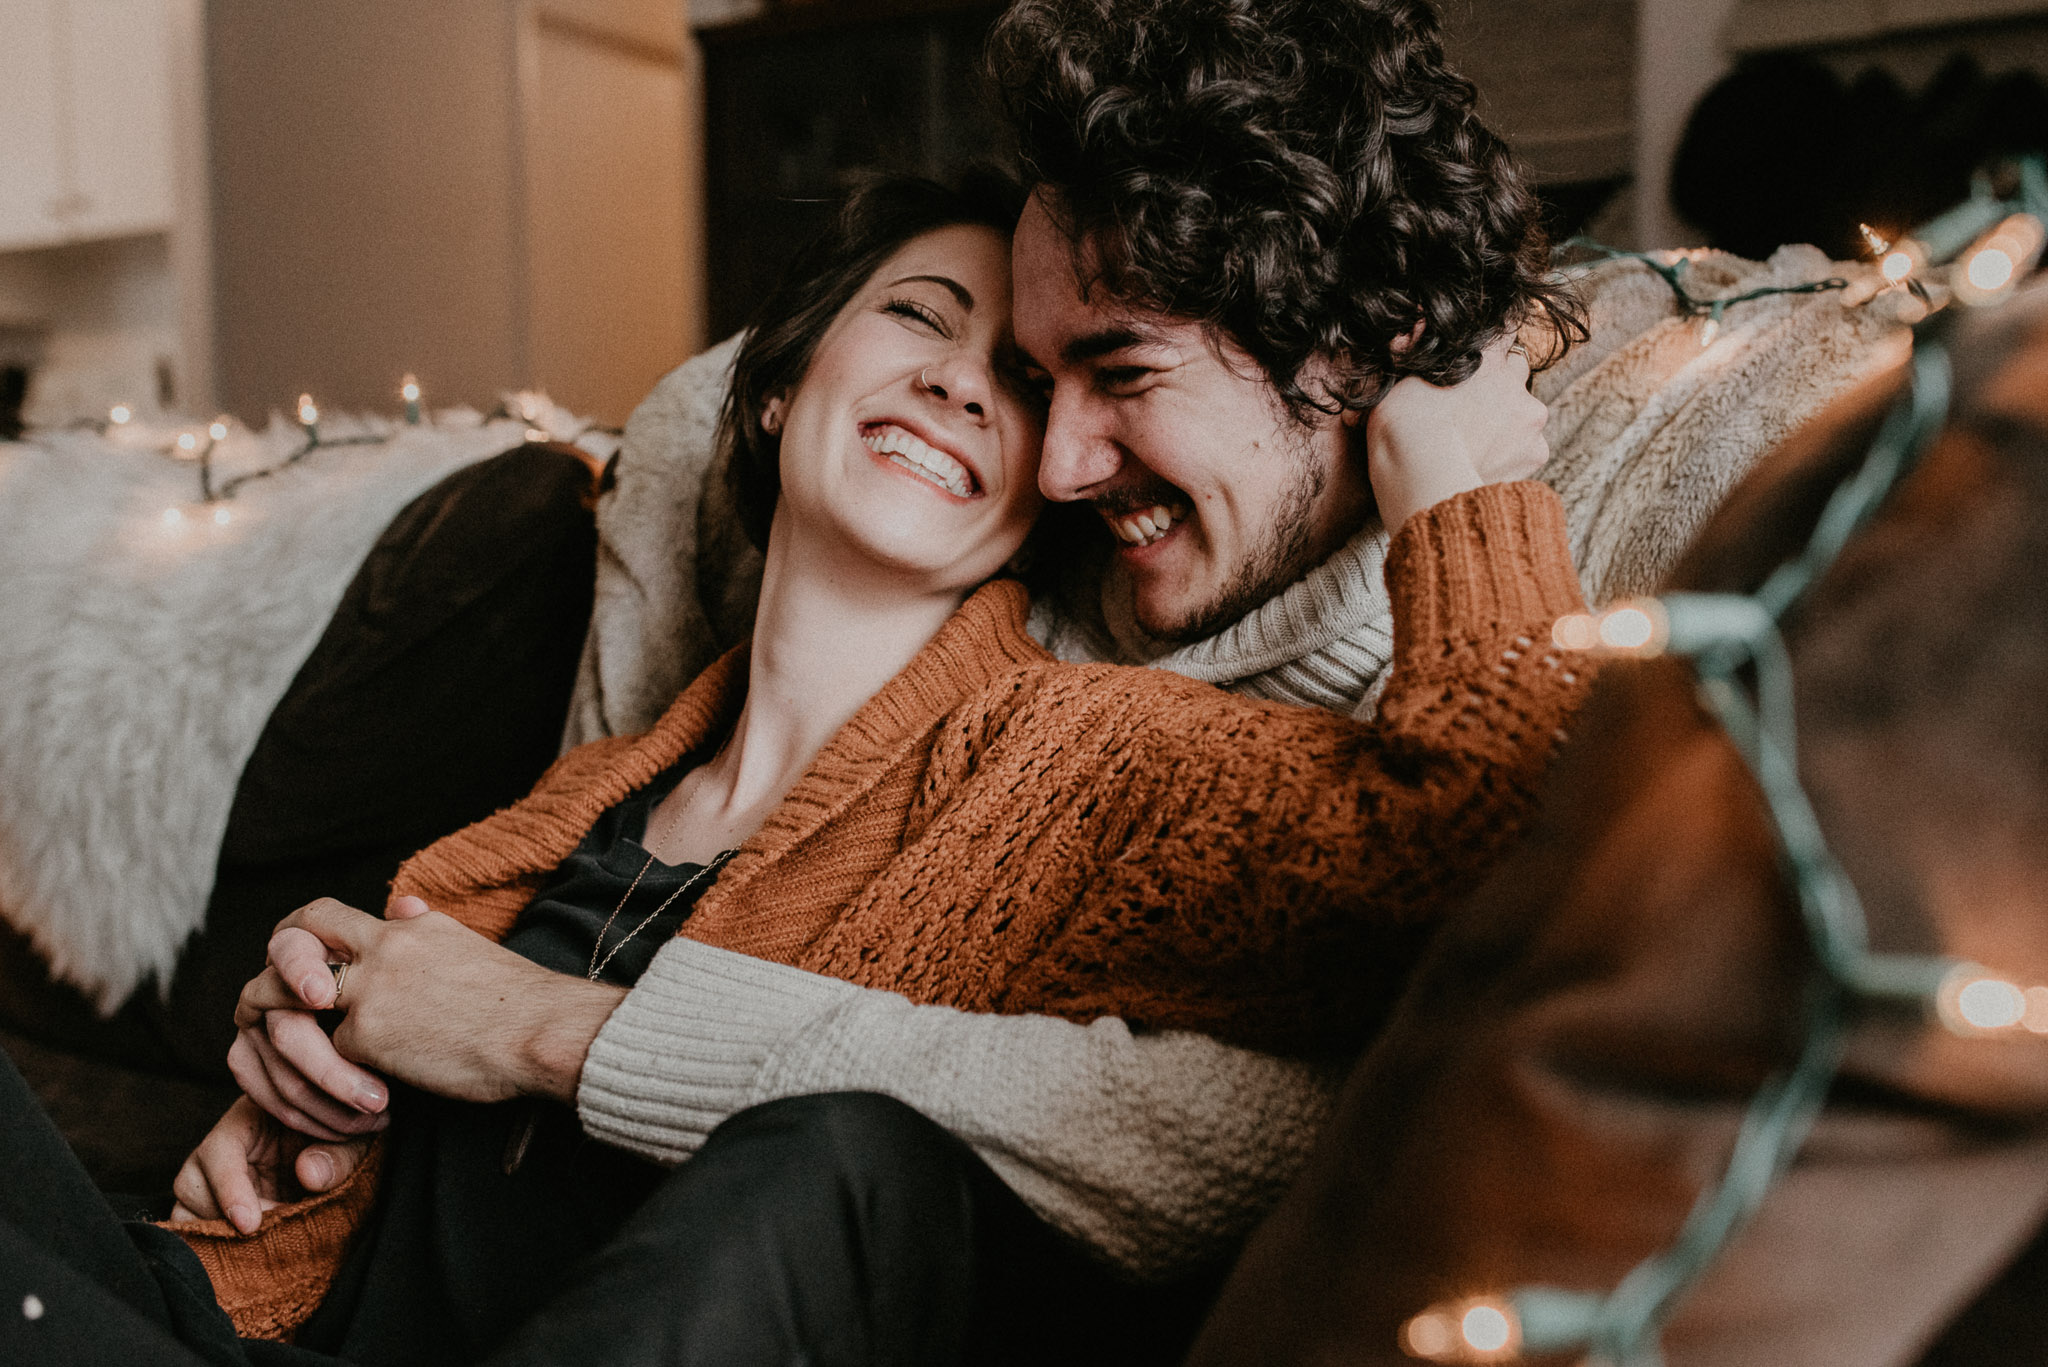 Makayla Madden Photography In Home Couples Winter Christmas Session Cozy Sweaters Laughter Love Anniversary Photo Ideas Boise Senior Boudoir Wedding Photographer Lifestyle